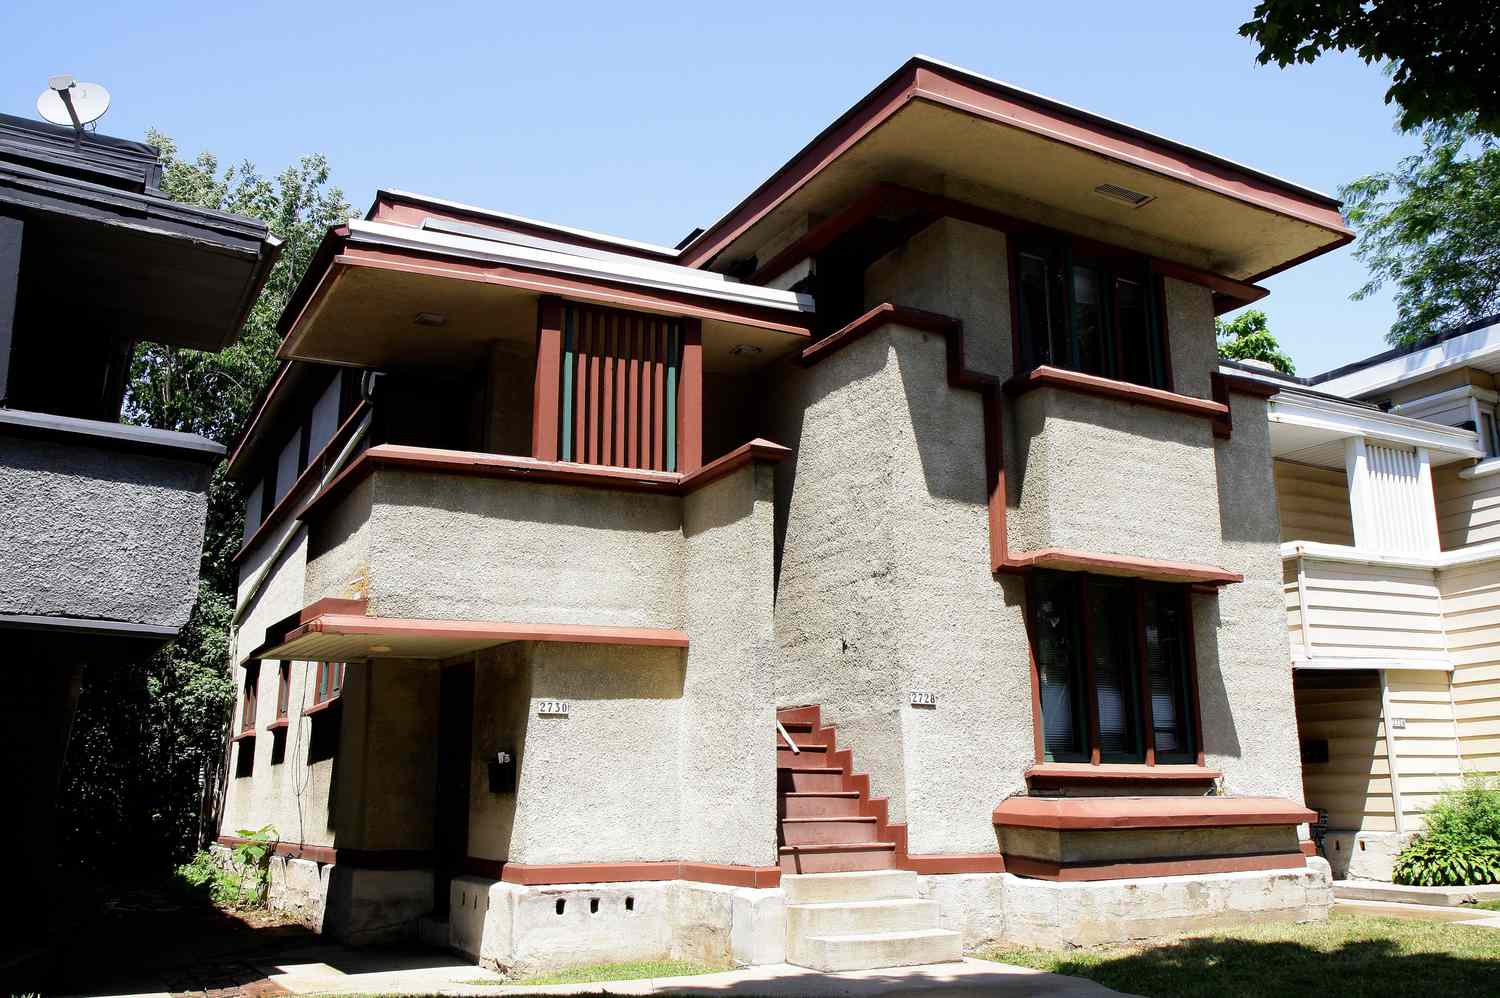 Frank Lloyd Wright designed duplex apartment, an American System-Built Home in Milwaukee, Wisconsin